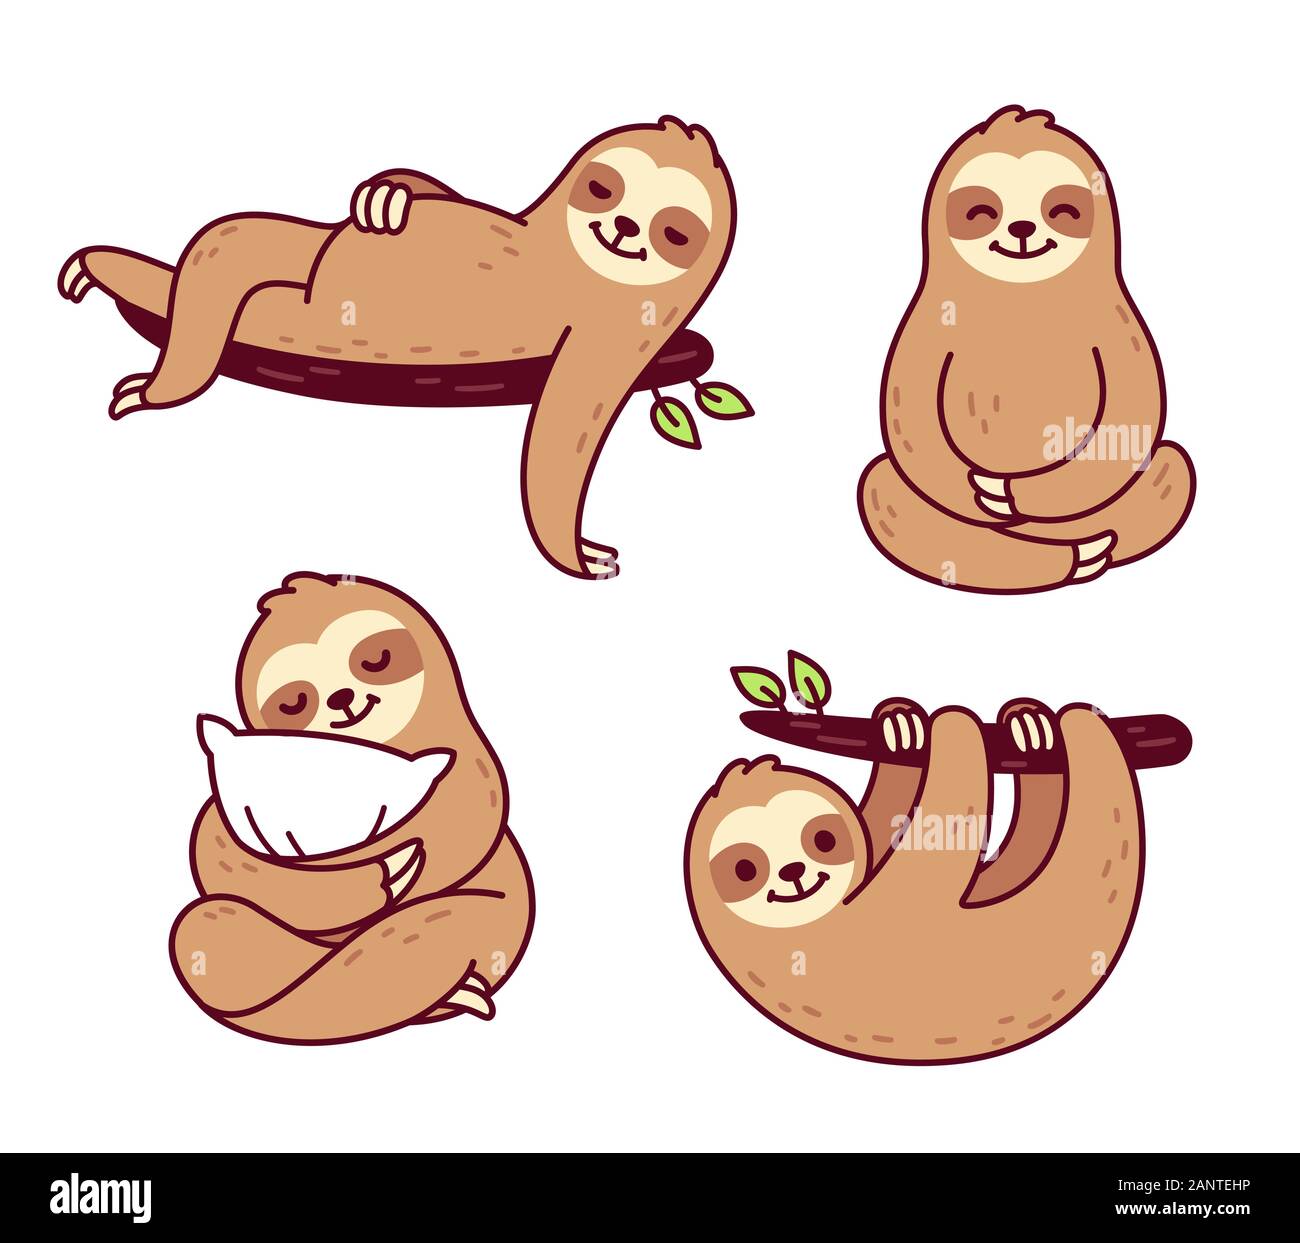 Cute Cartoon Sloth Character Drawing Set Hanging From Tree Branch Sitting Hugging Pillow